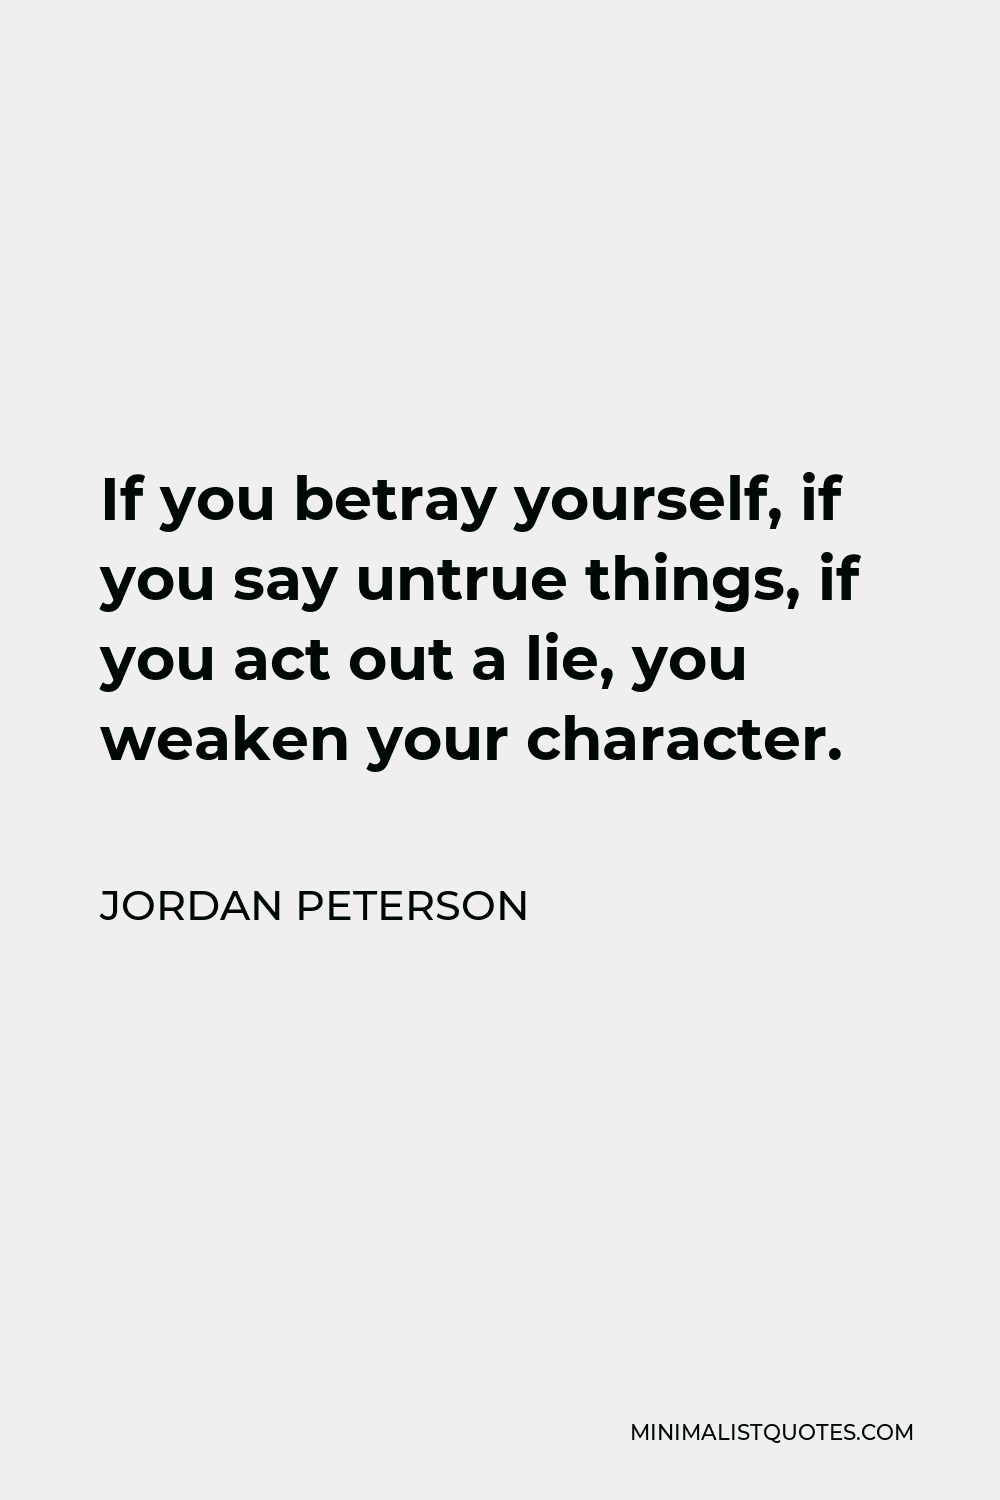 Jordan Peterson Quote - If you betray yourself, if you say untrue things, if you act out a lie, you weaken your character.